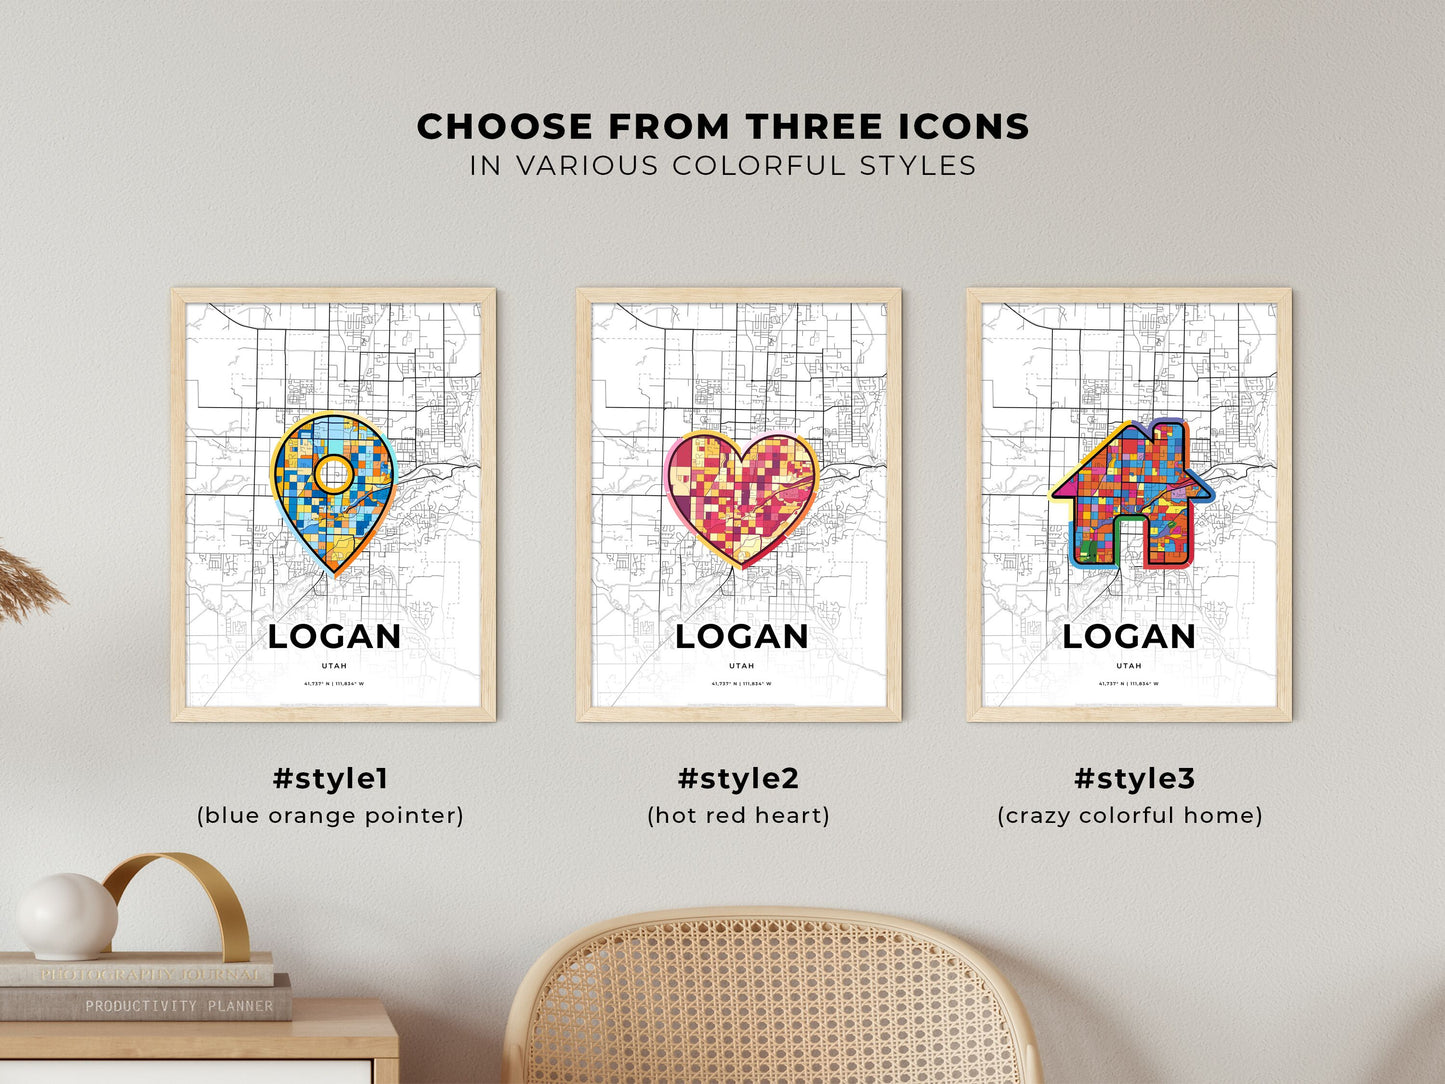 LOGAN UTAH minimal art map with a colorful icon. Where it all began, Couple map gift.